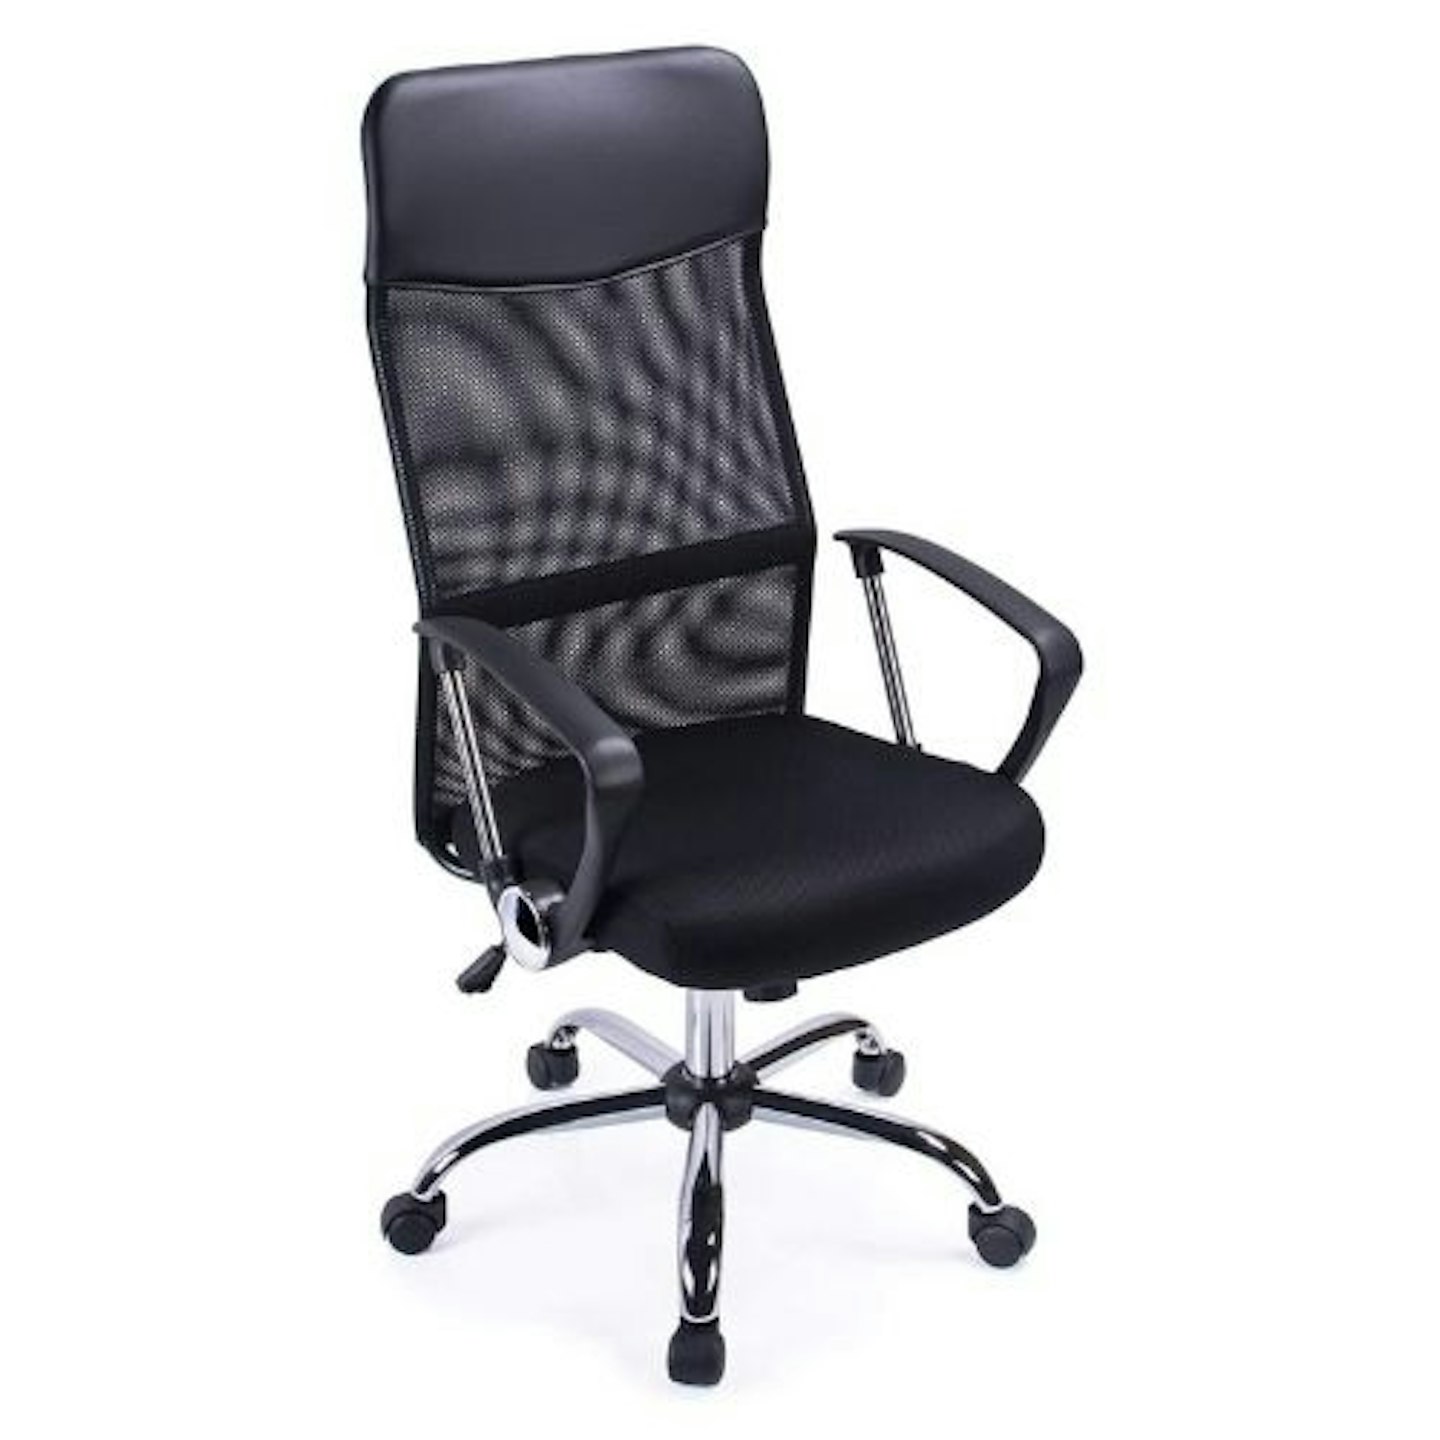 Exofcer High Curved Back Mesh Home Office Chair